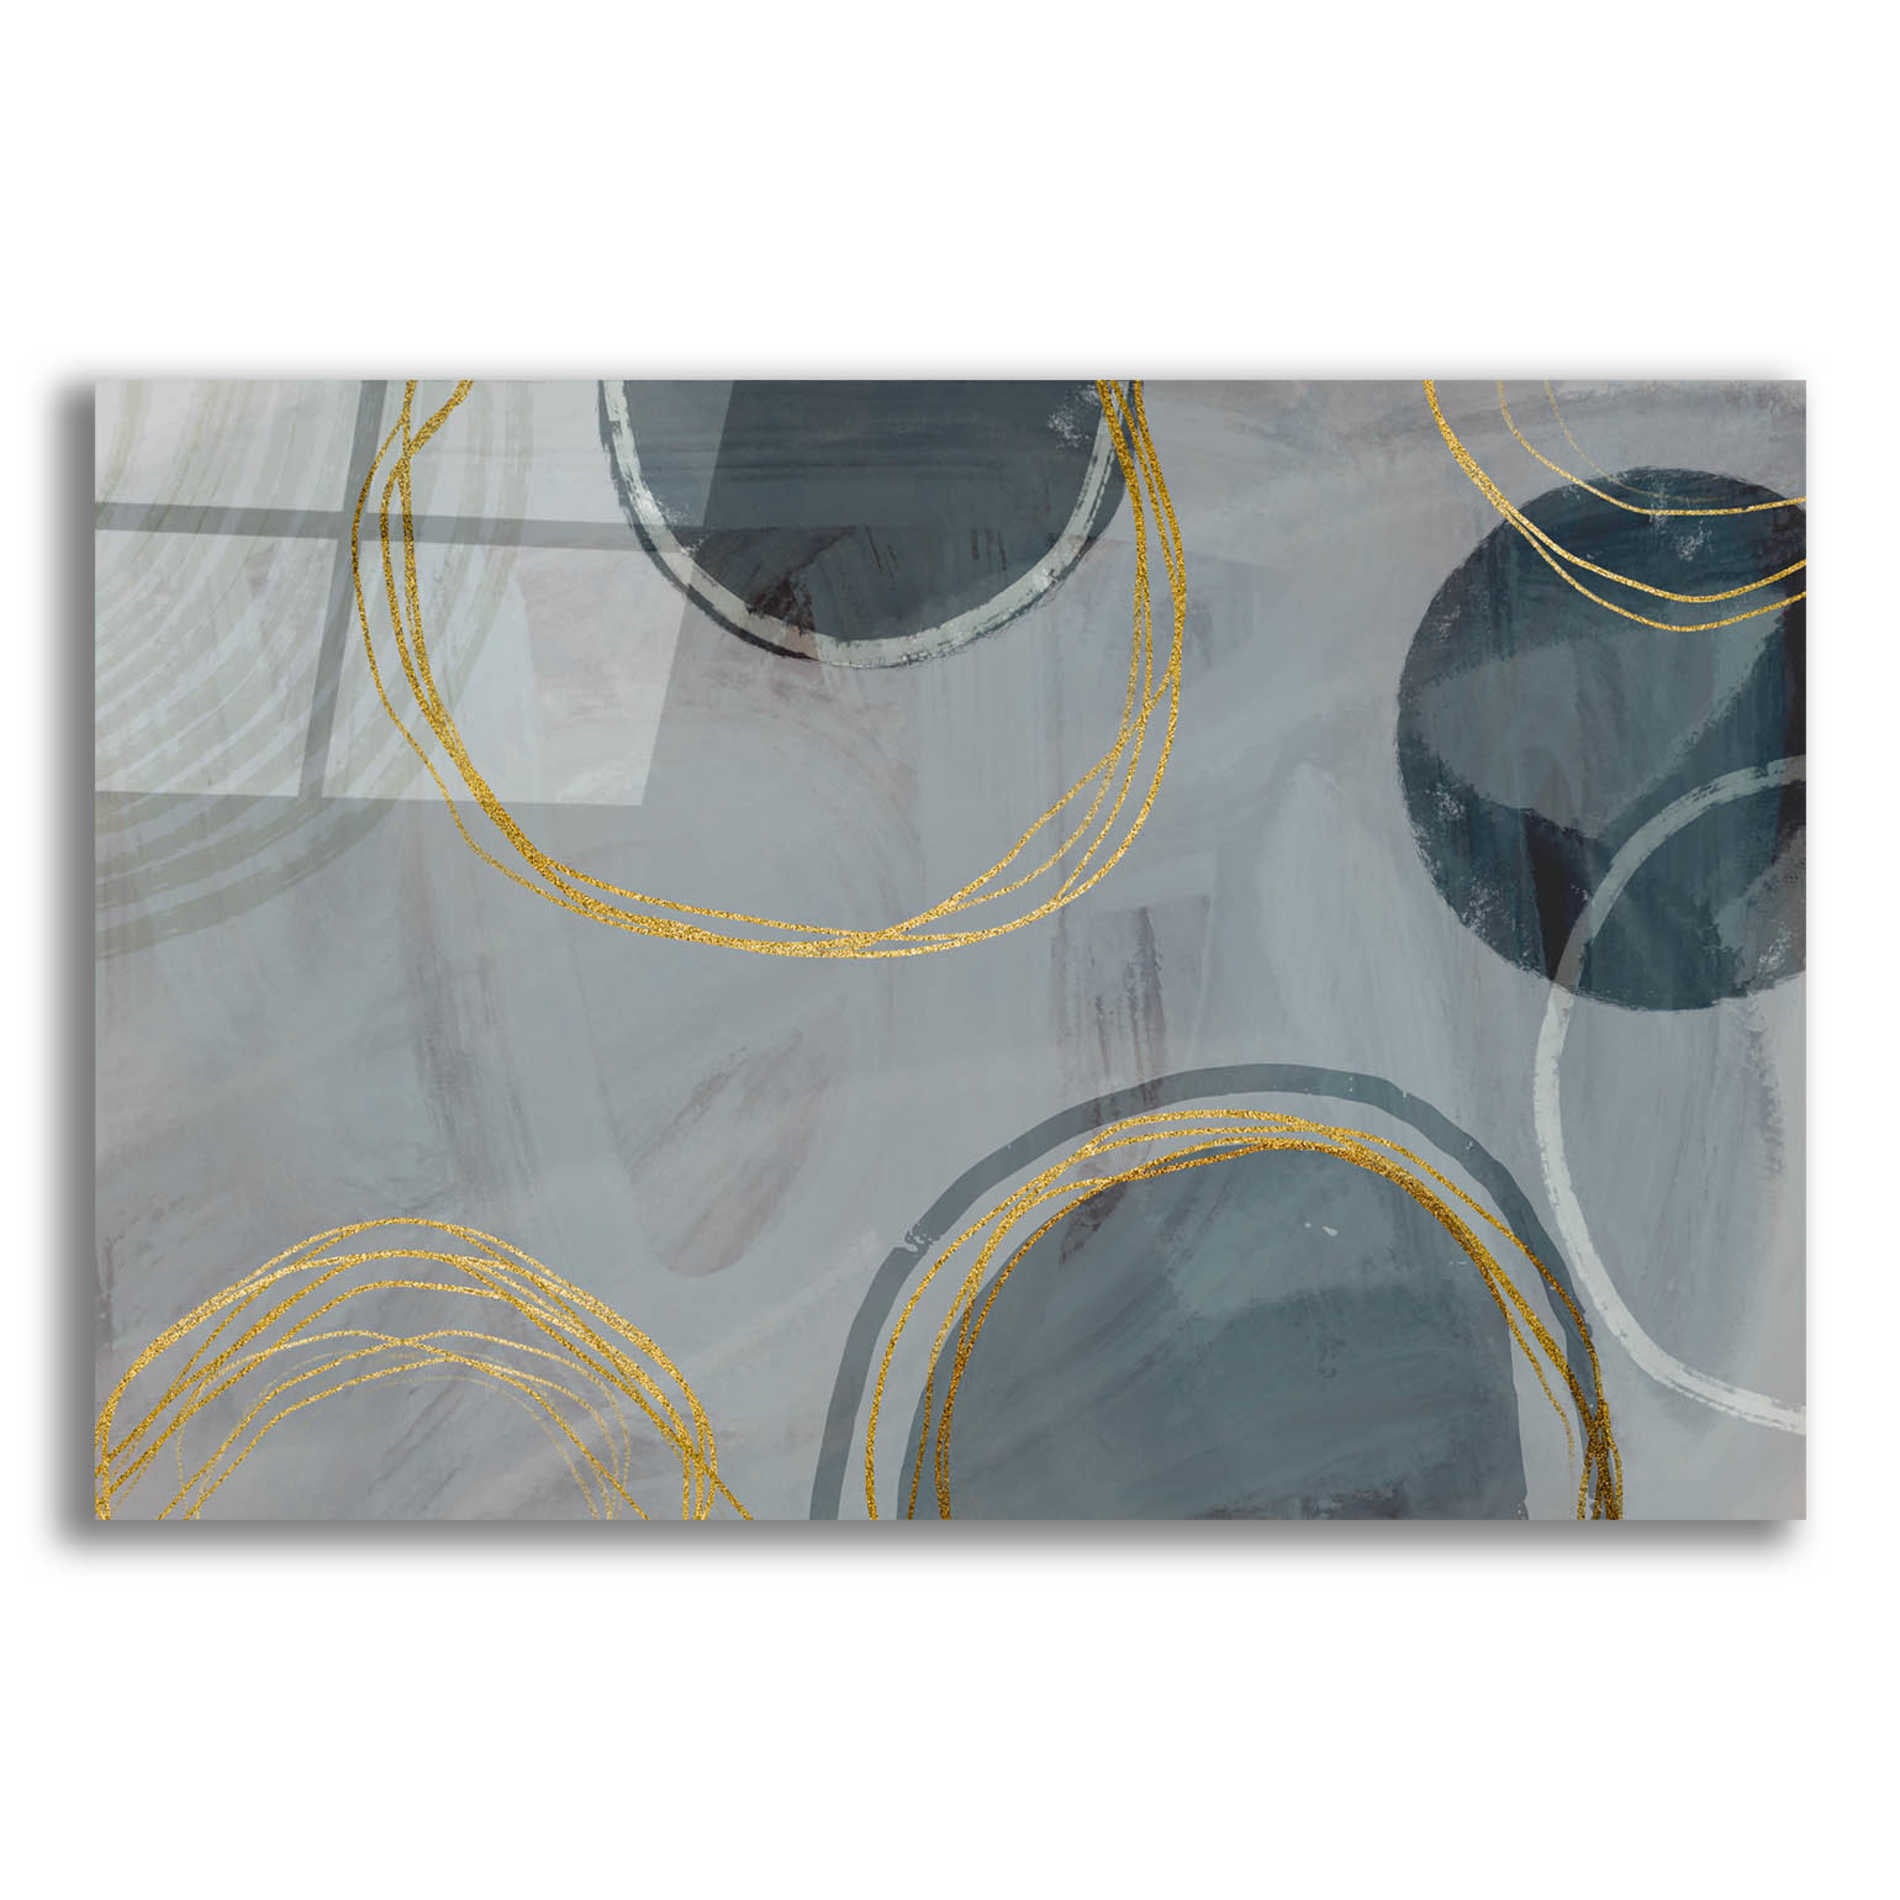 Epic Art 'Golden Line Abstraction' by Andrea Haase Acrylic Glass Wall Art,16x12